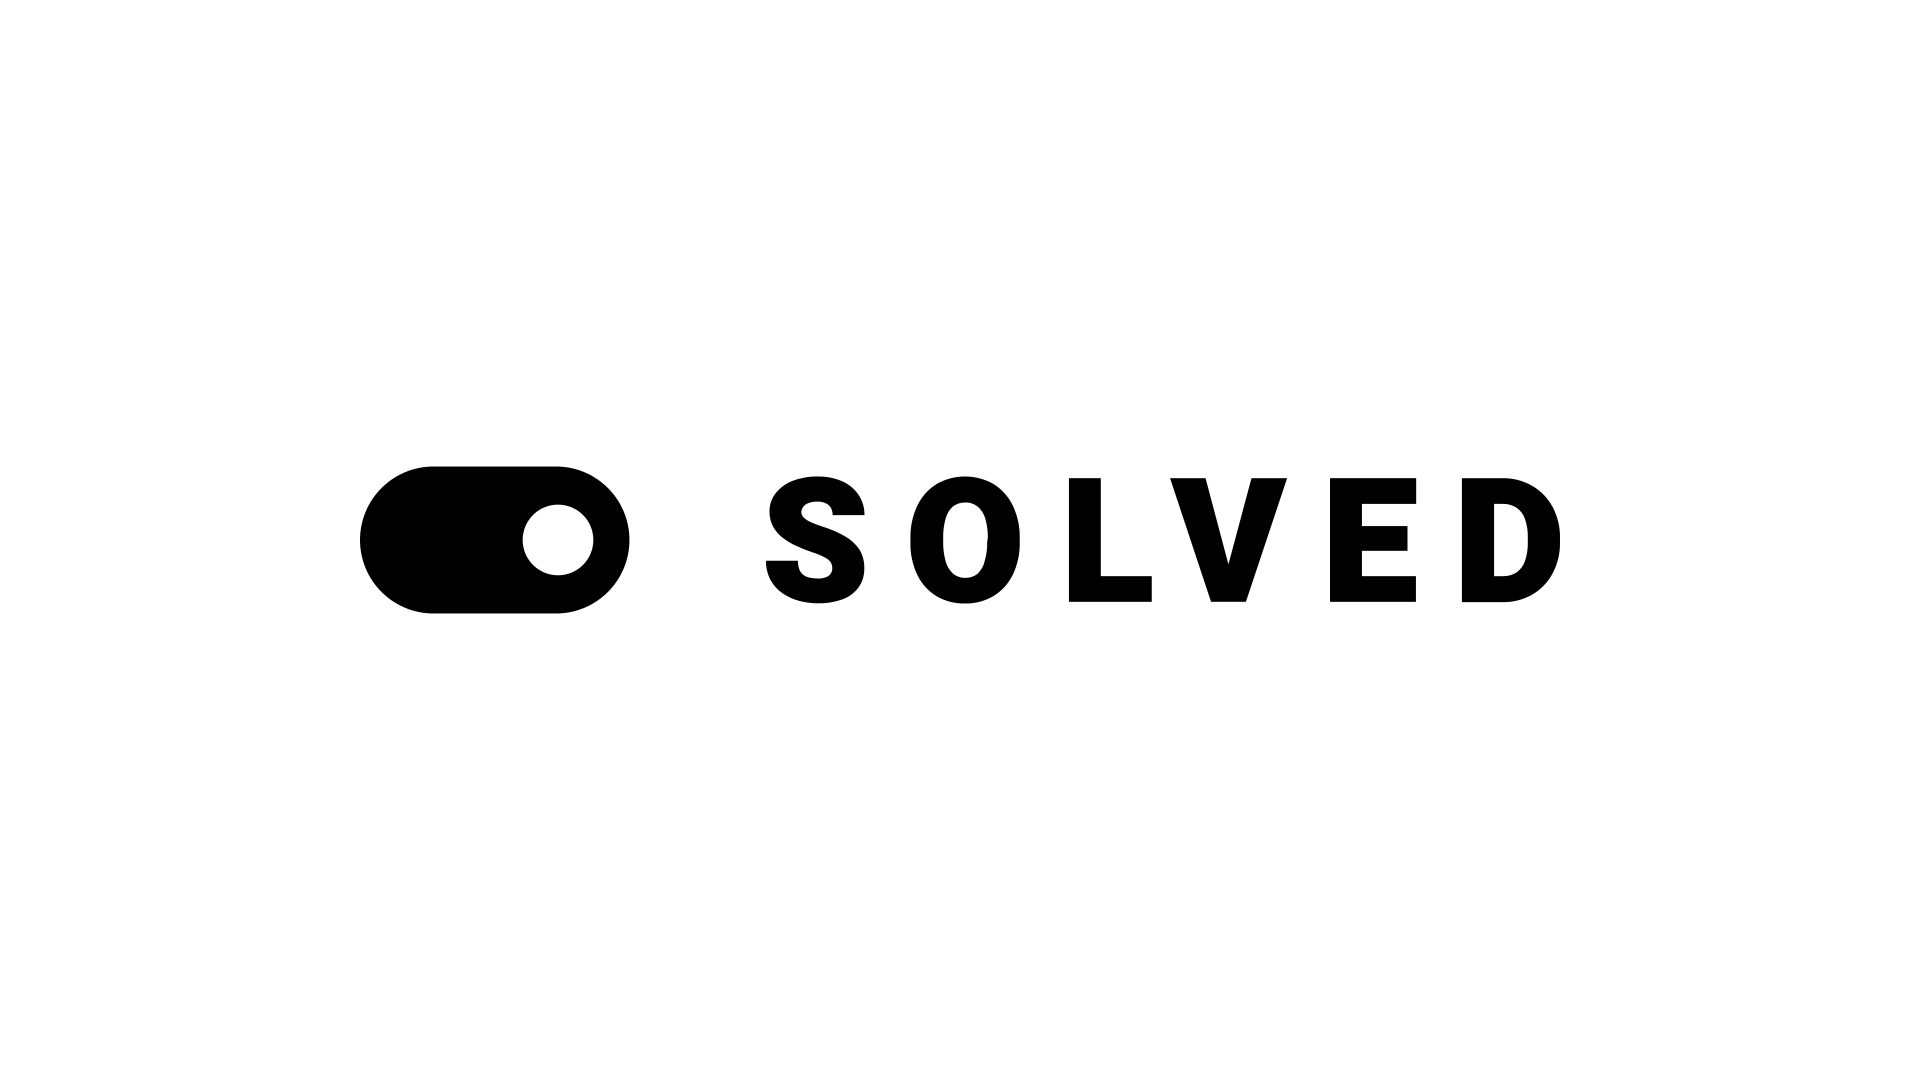 (c) Solved-it.ch